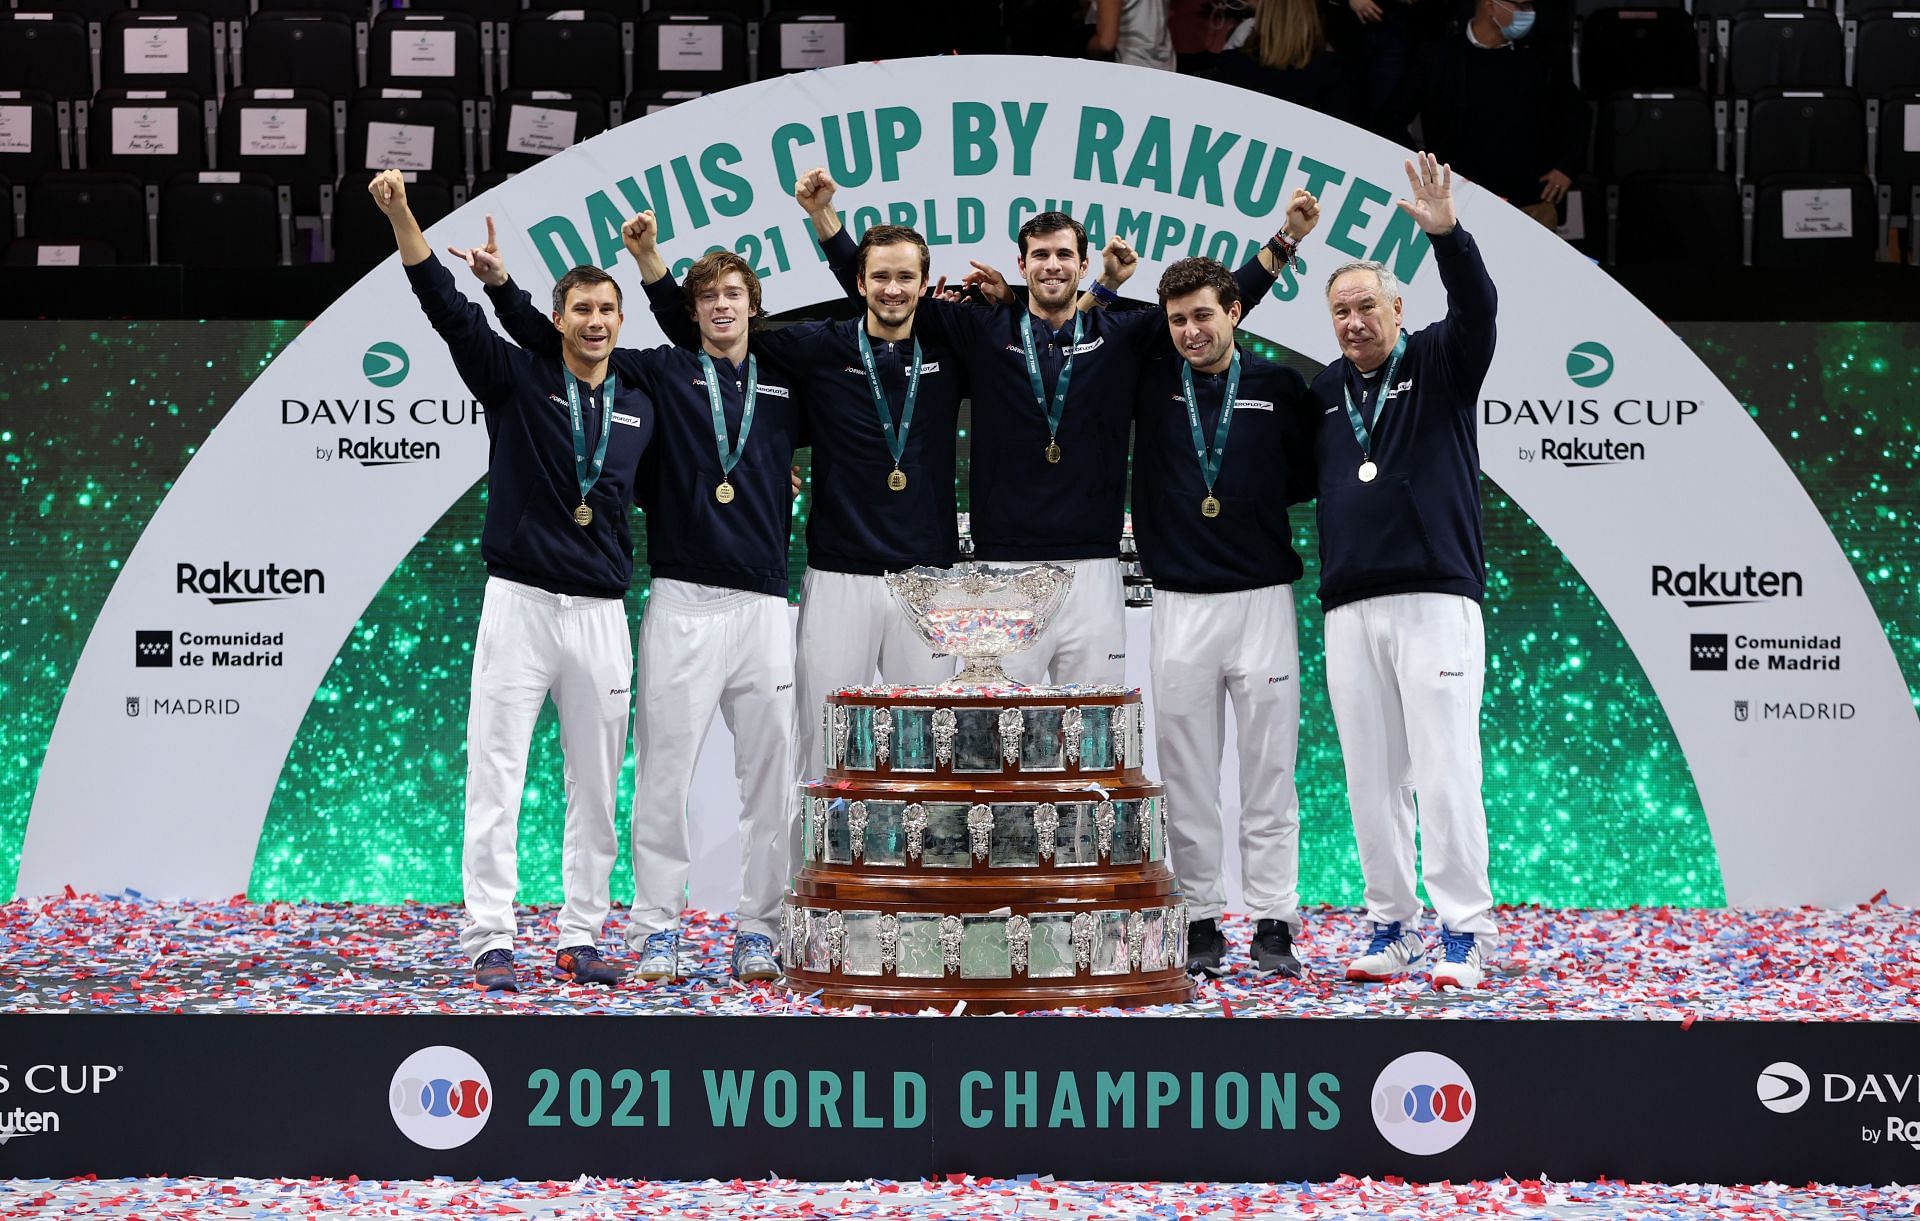 The team was prohibited from contesting the 2022 Davis Cup